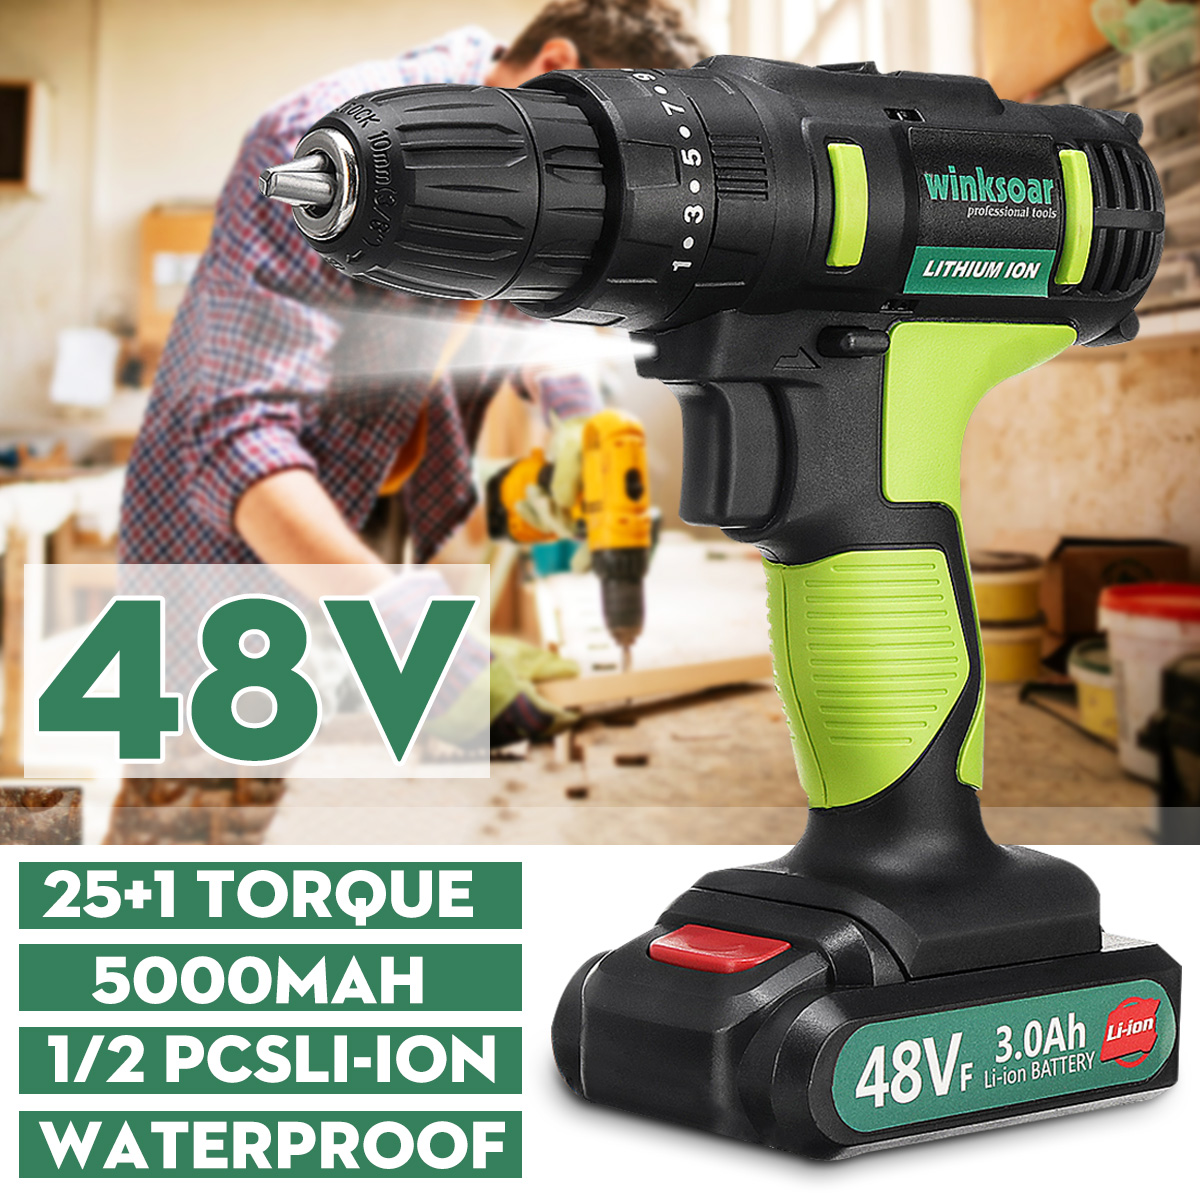 48VF-3-in-1-251-Gears-Electric-Impact-Drill-2-Speeds-Rechargeable-Screwdriver-W-LED-Light-1733392-2